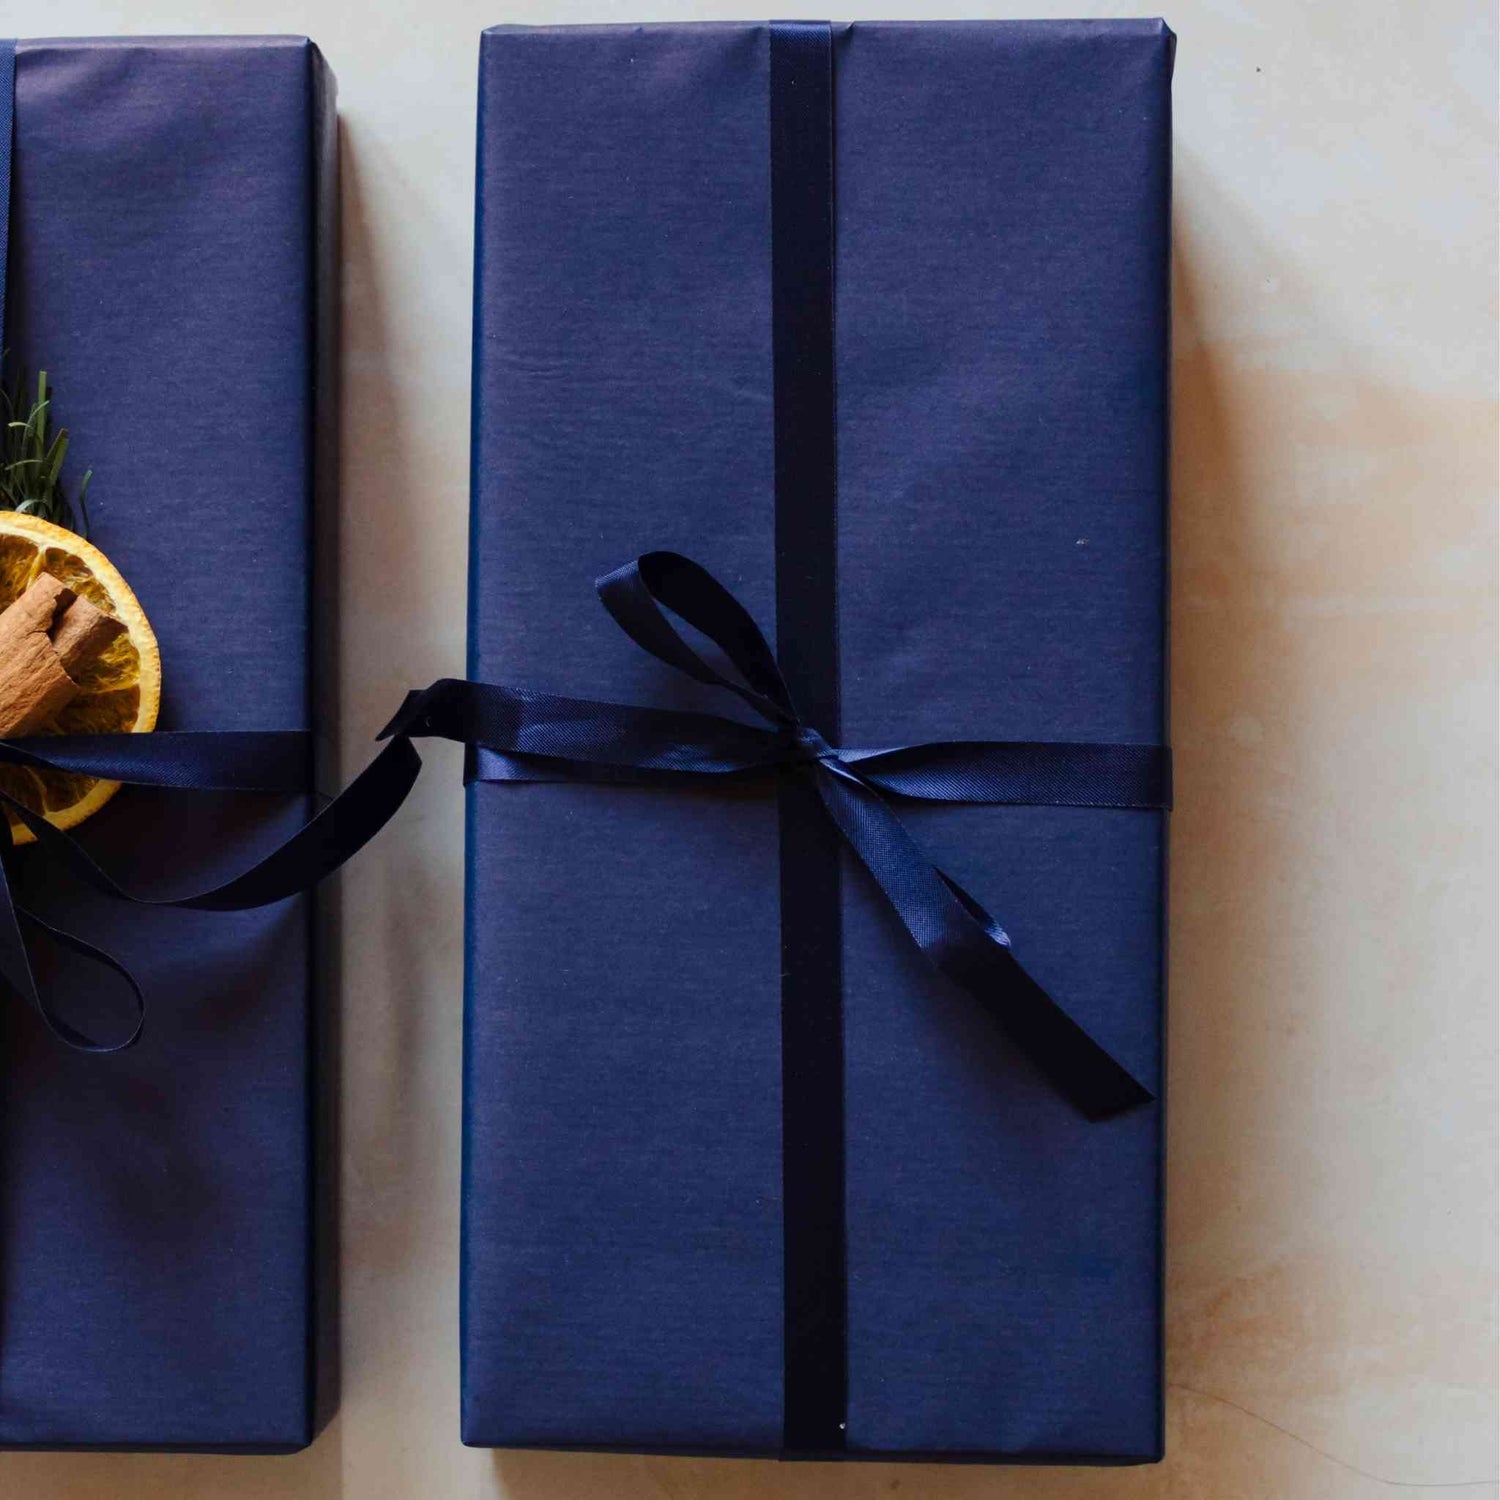 A linen scented reed diffuser from the Home County Co. is shown with luxury Gift Wrap. The reed diffuser is wrapped in luxury navy wrapping paper secured with navy ribbon.